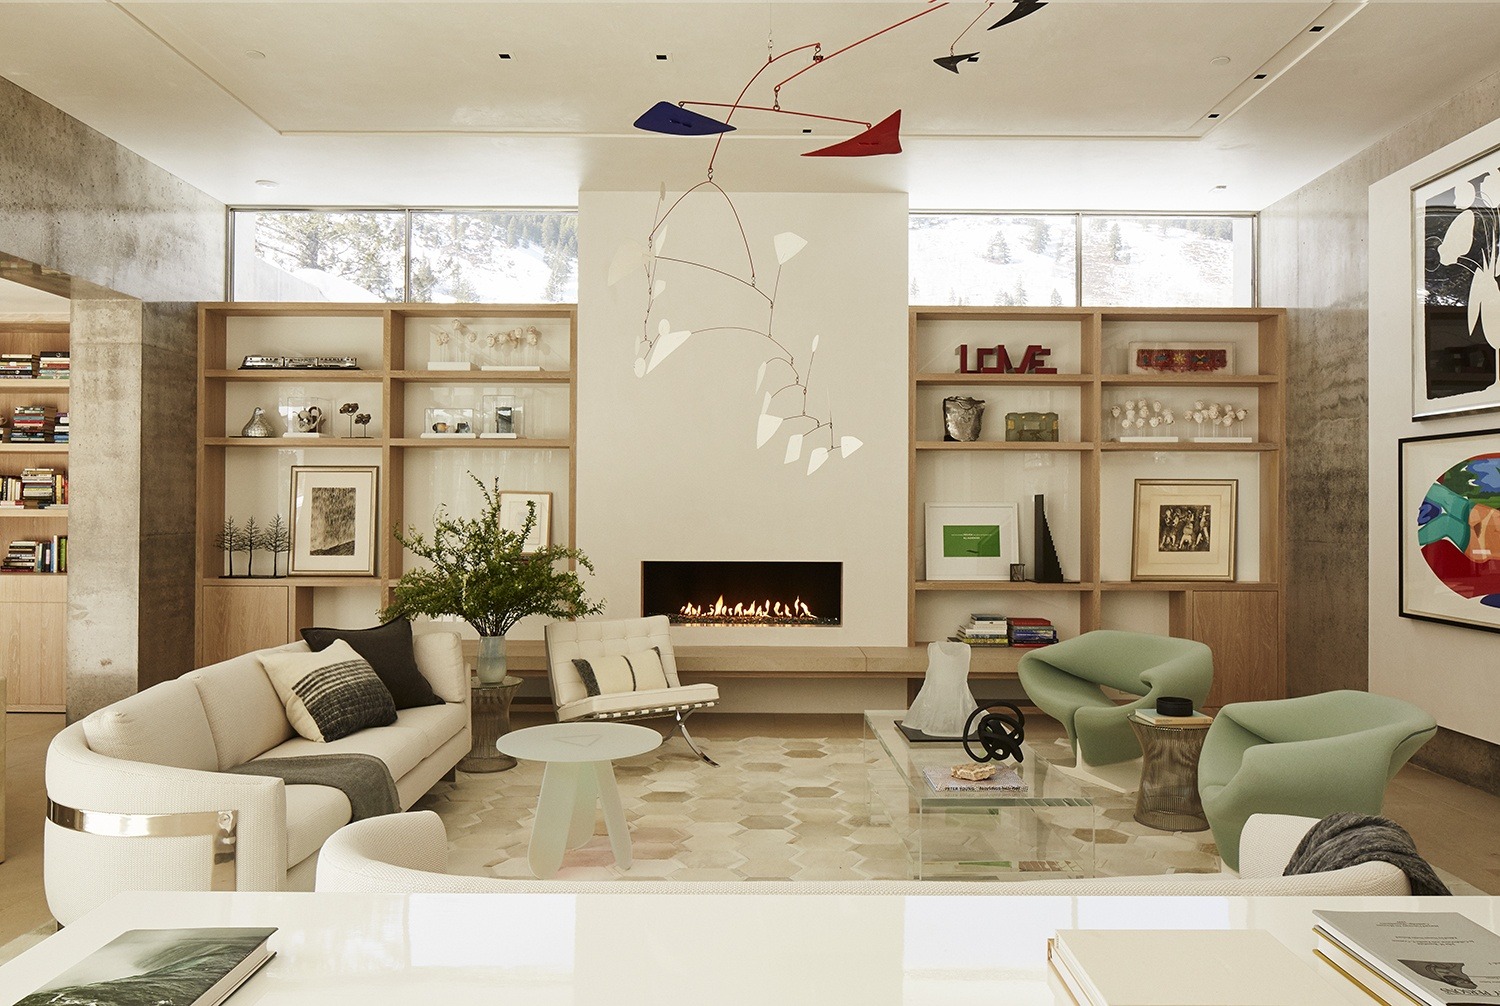 The living room in this Michael Imber-designed home was produced around a massive Alexander Calder mobile, while a floating wall was installed to display works by Donald Sultan and Tom Wesselmann from the homeowner’s collection.